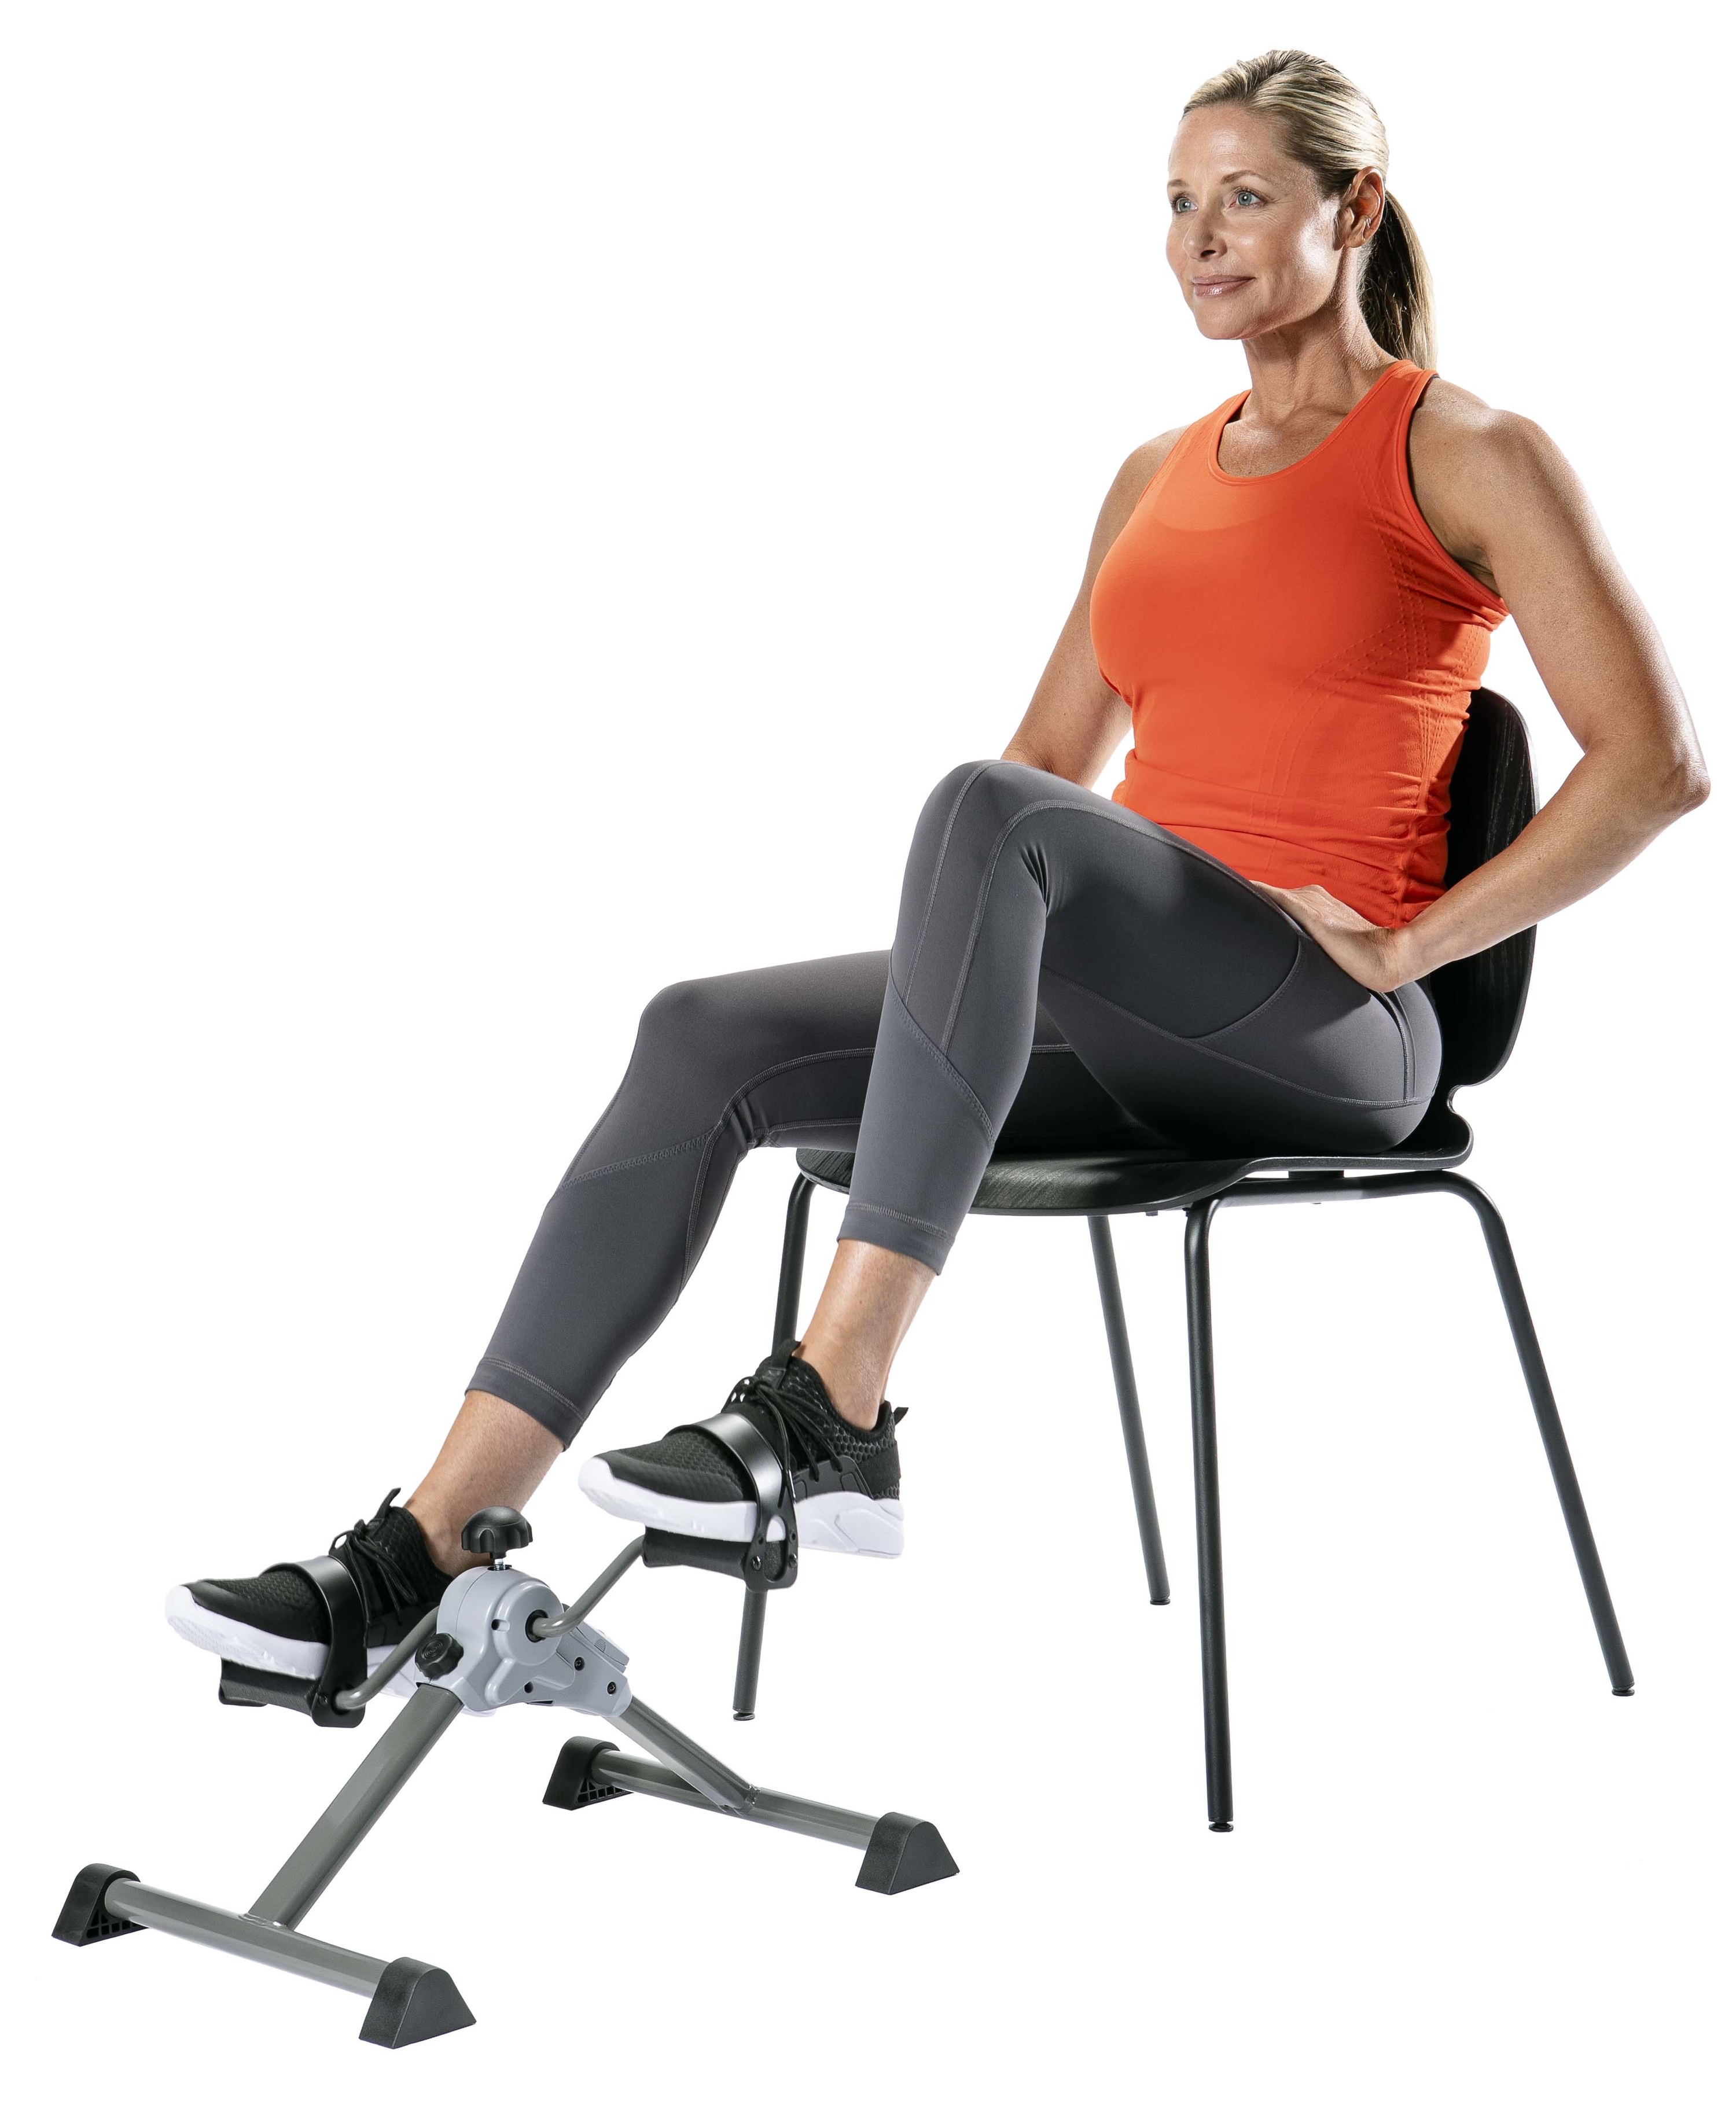 Model sitting on a chair using peddle exerciser on white background